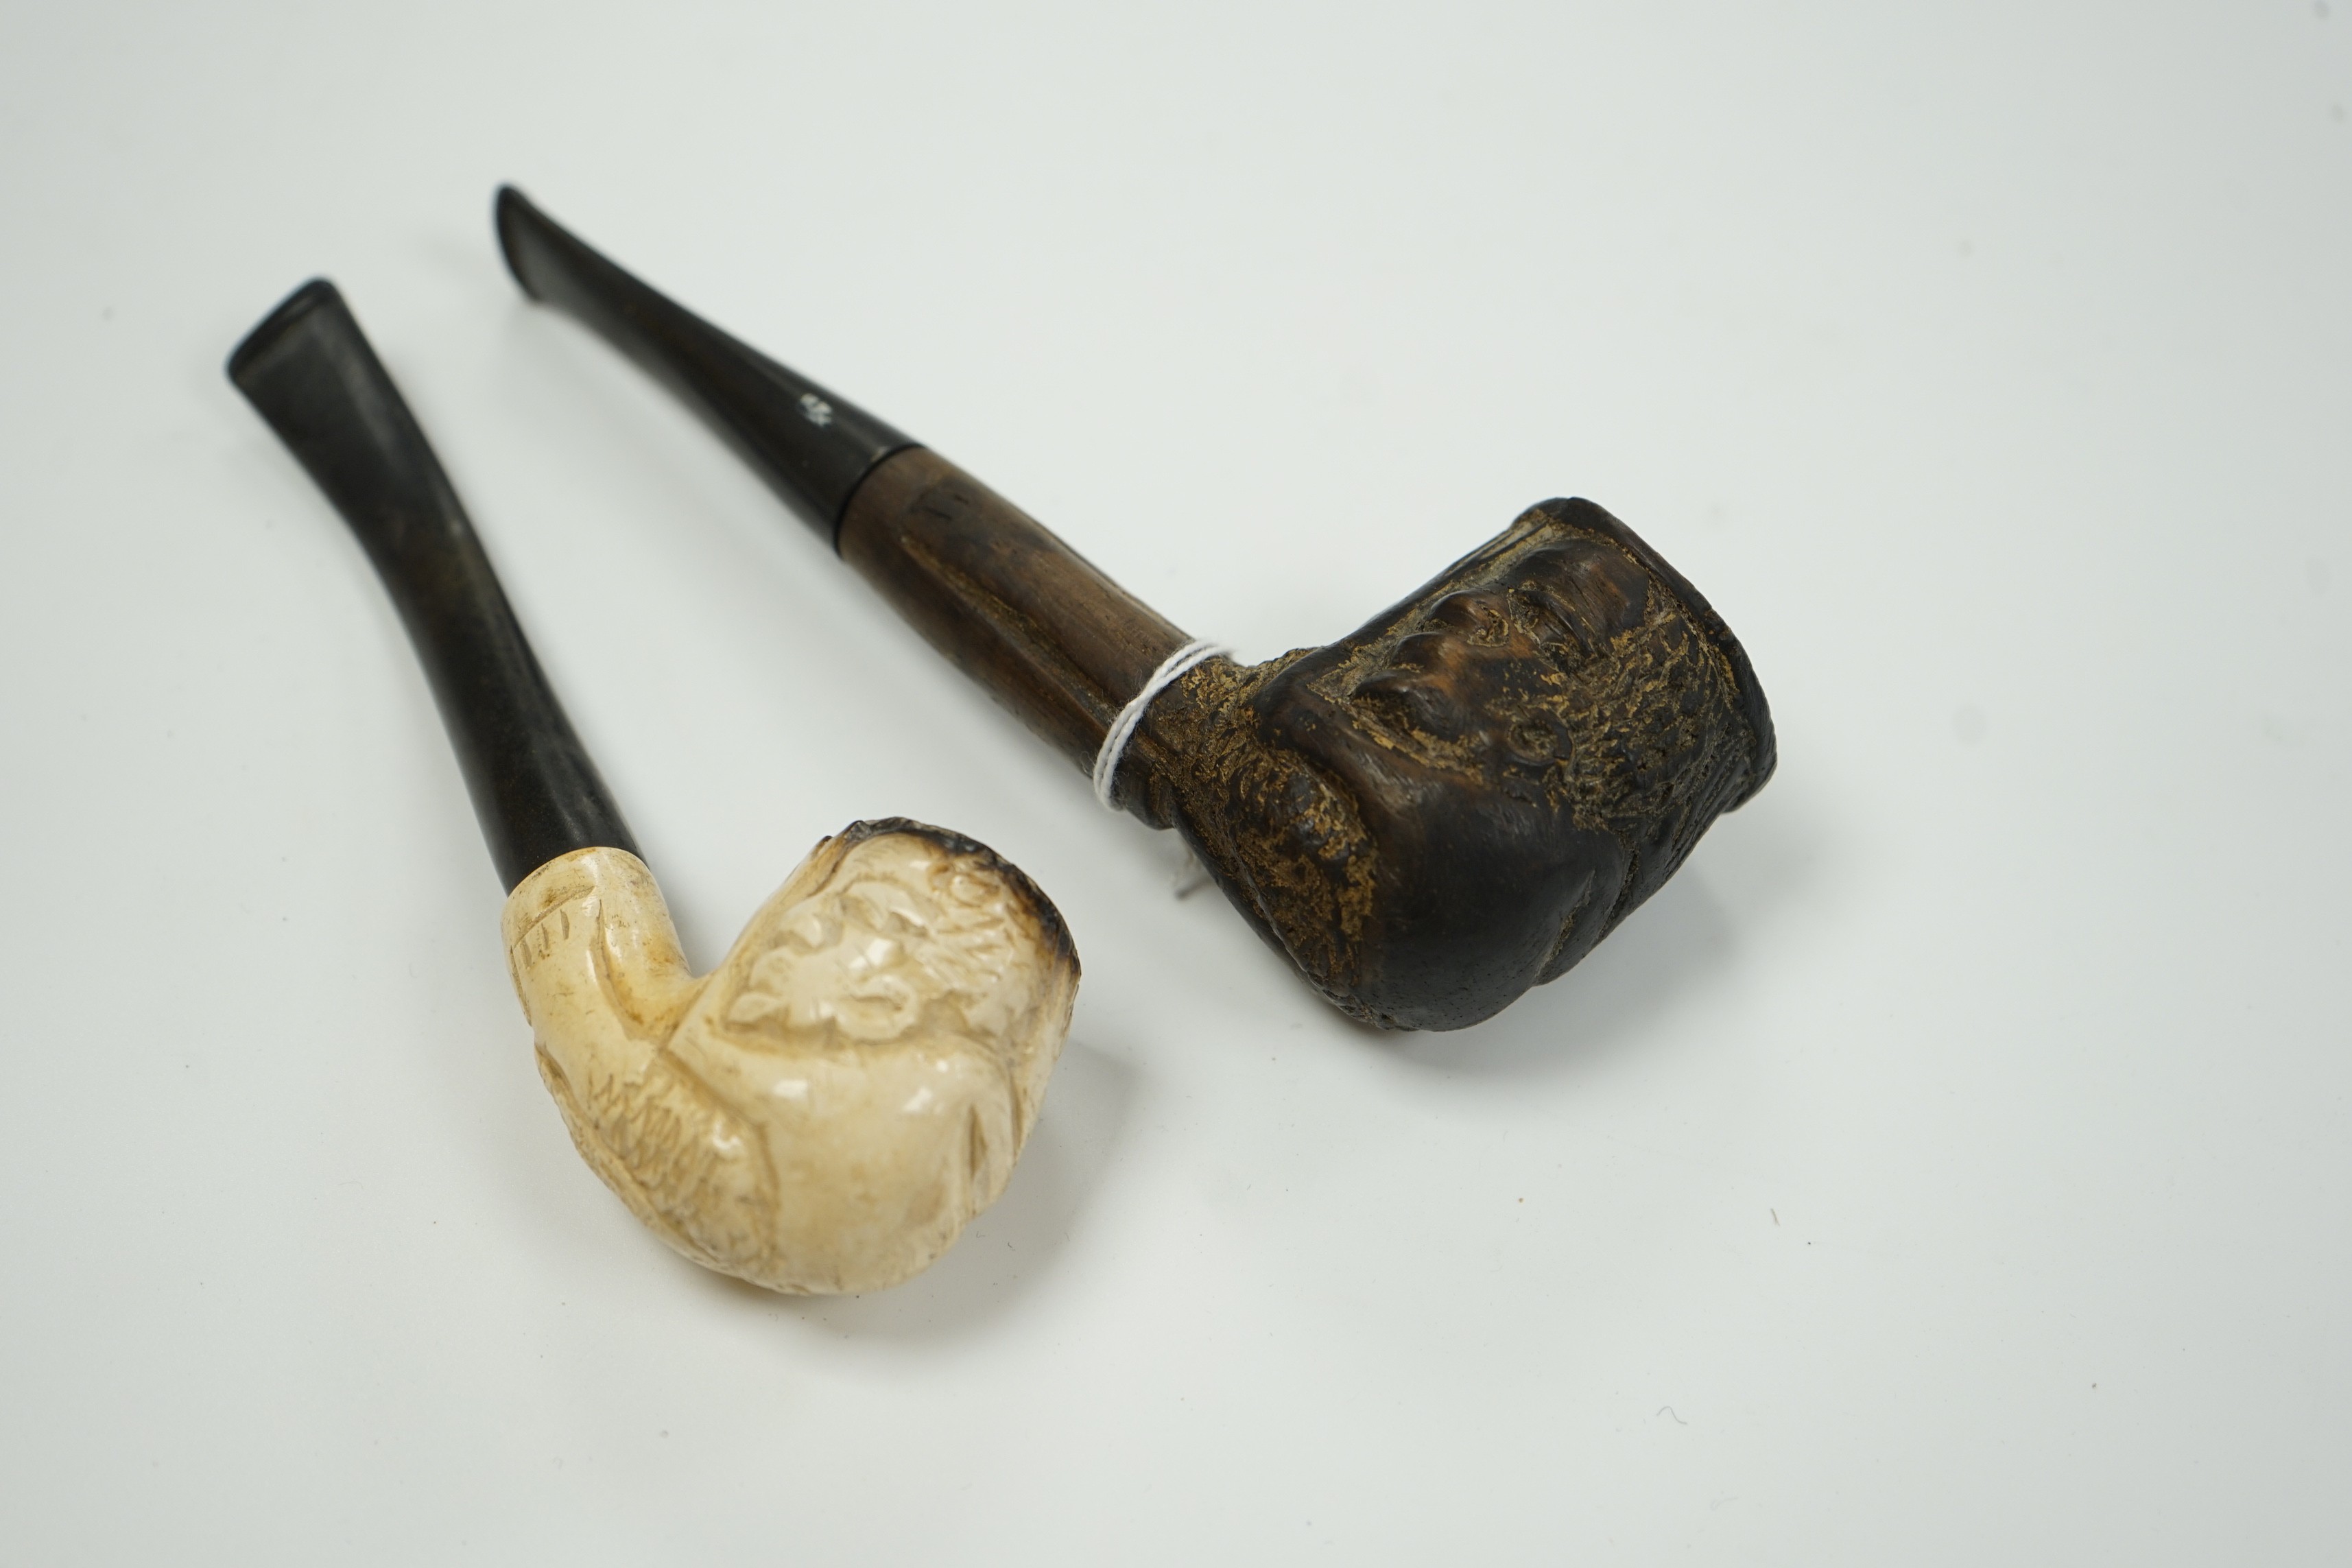 A Meerschaum pipe and an African ebony pipe